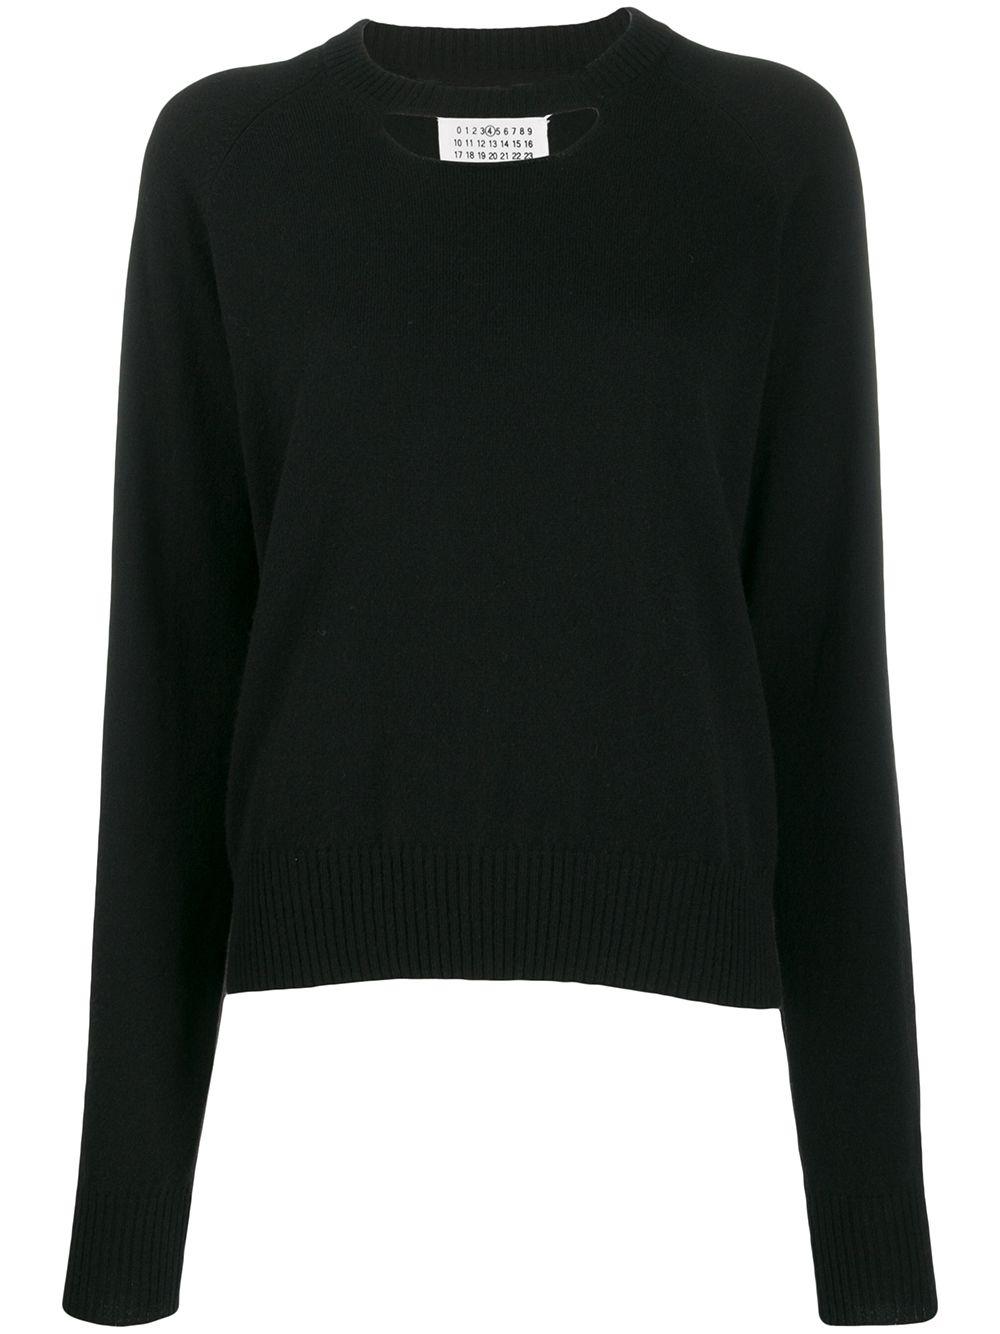 Maison Margiela Cashmere Chest Cut-out Sweater in Black - Save 40% - Lyst